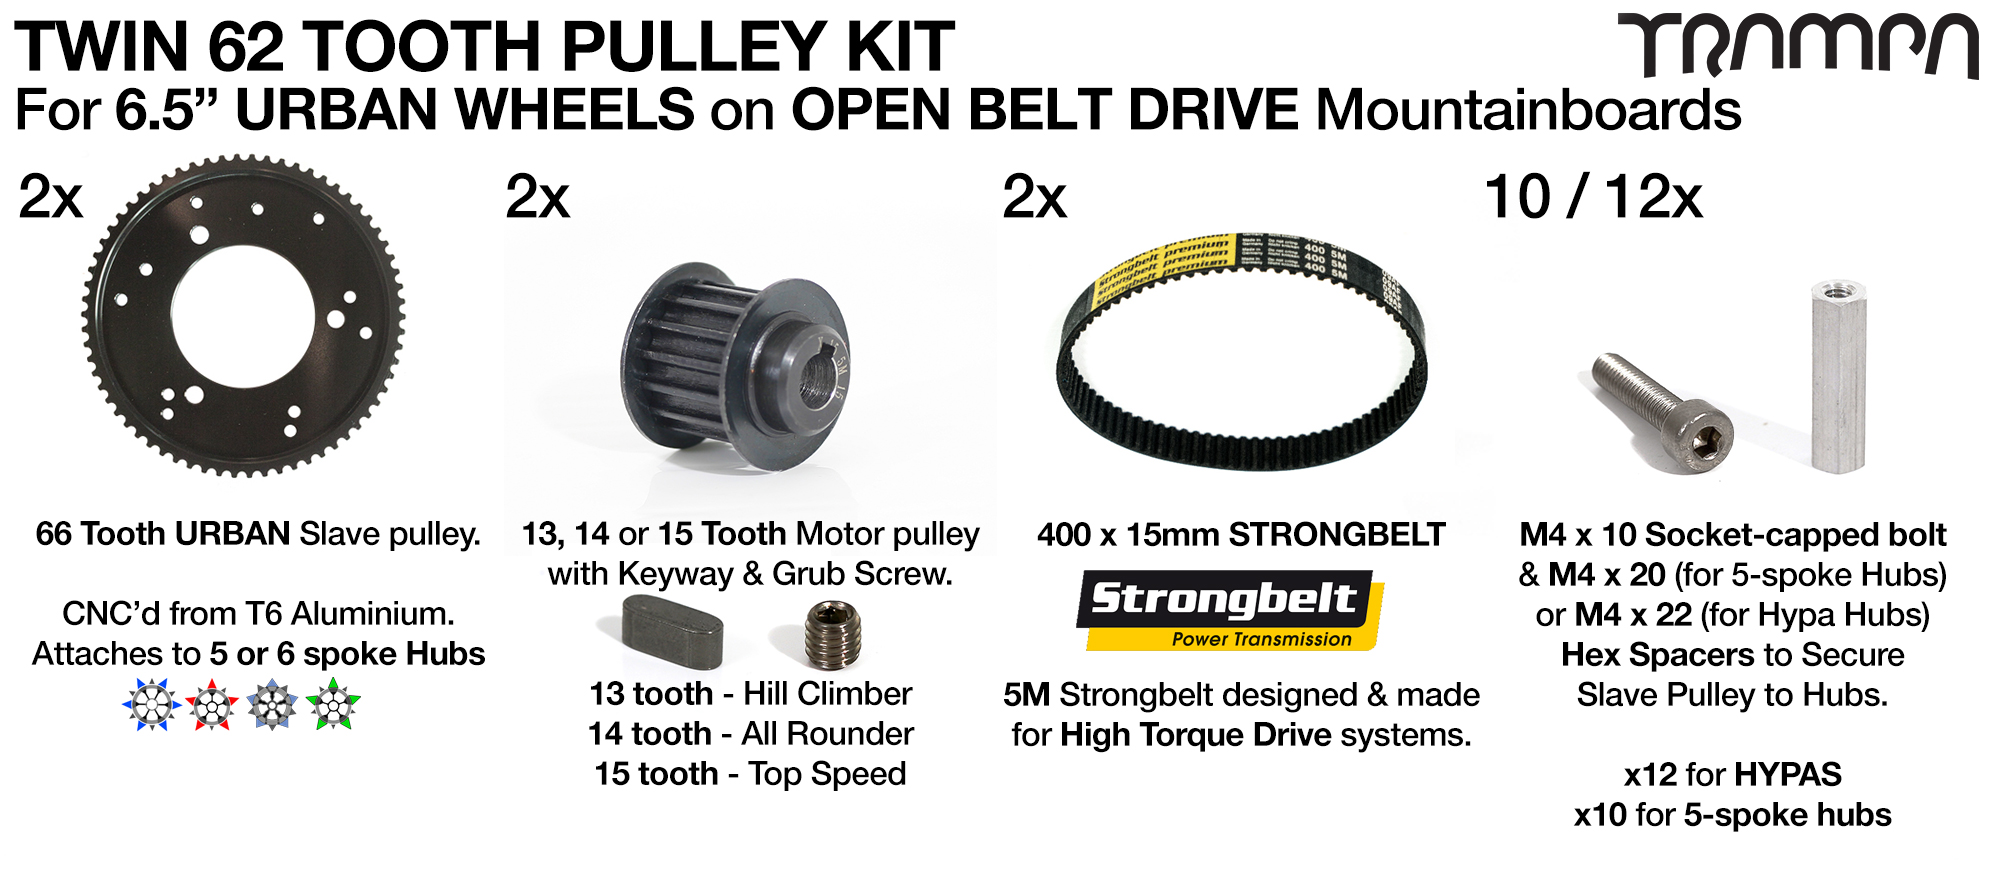 Open Belt Drive Pulley Kit with 400mm x 15mm Belt for 62 Tooth Slave to be used with 6.5 Inch URBAN Wheels - TWIN